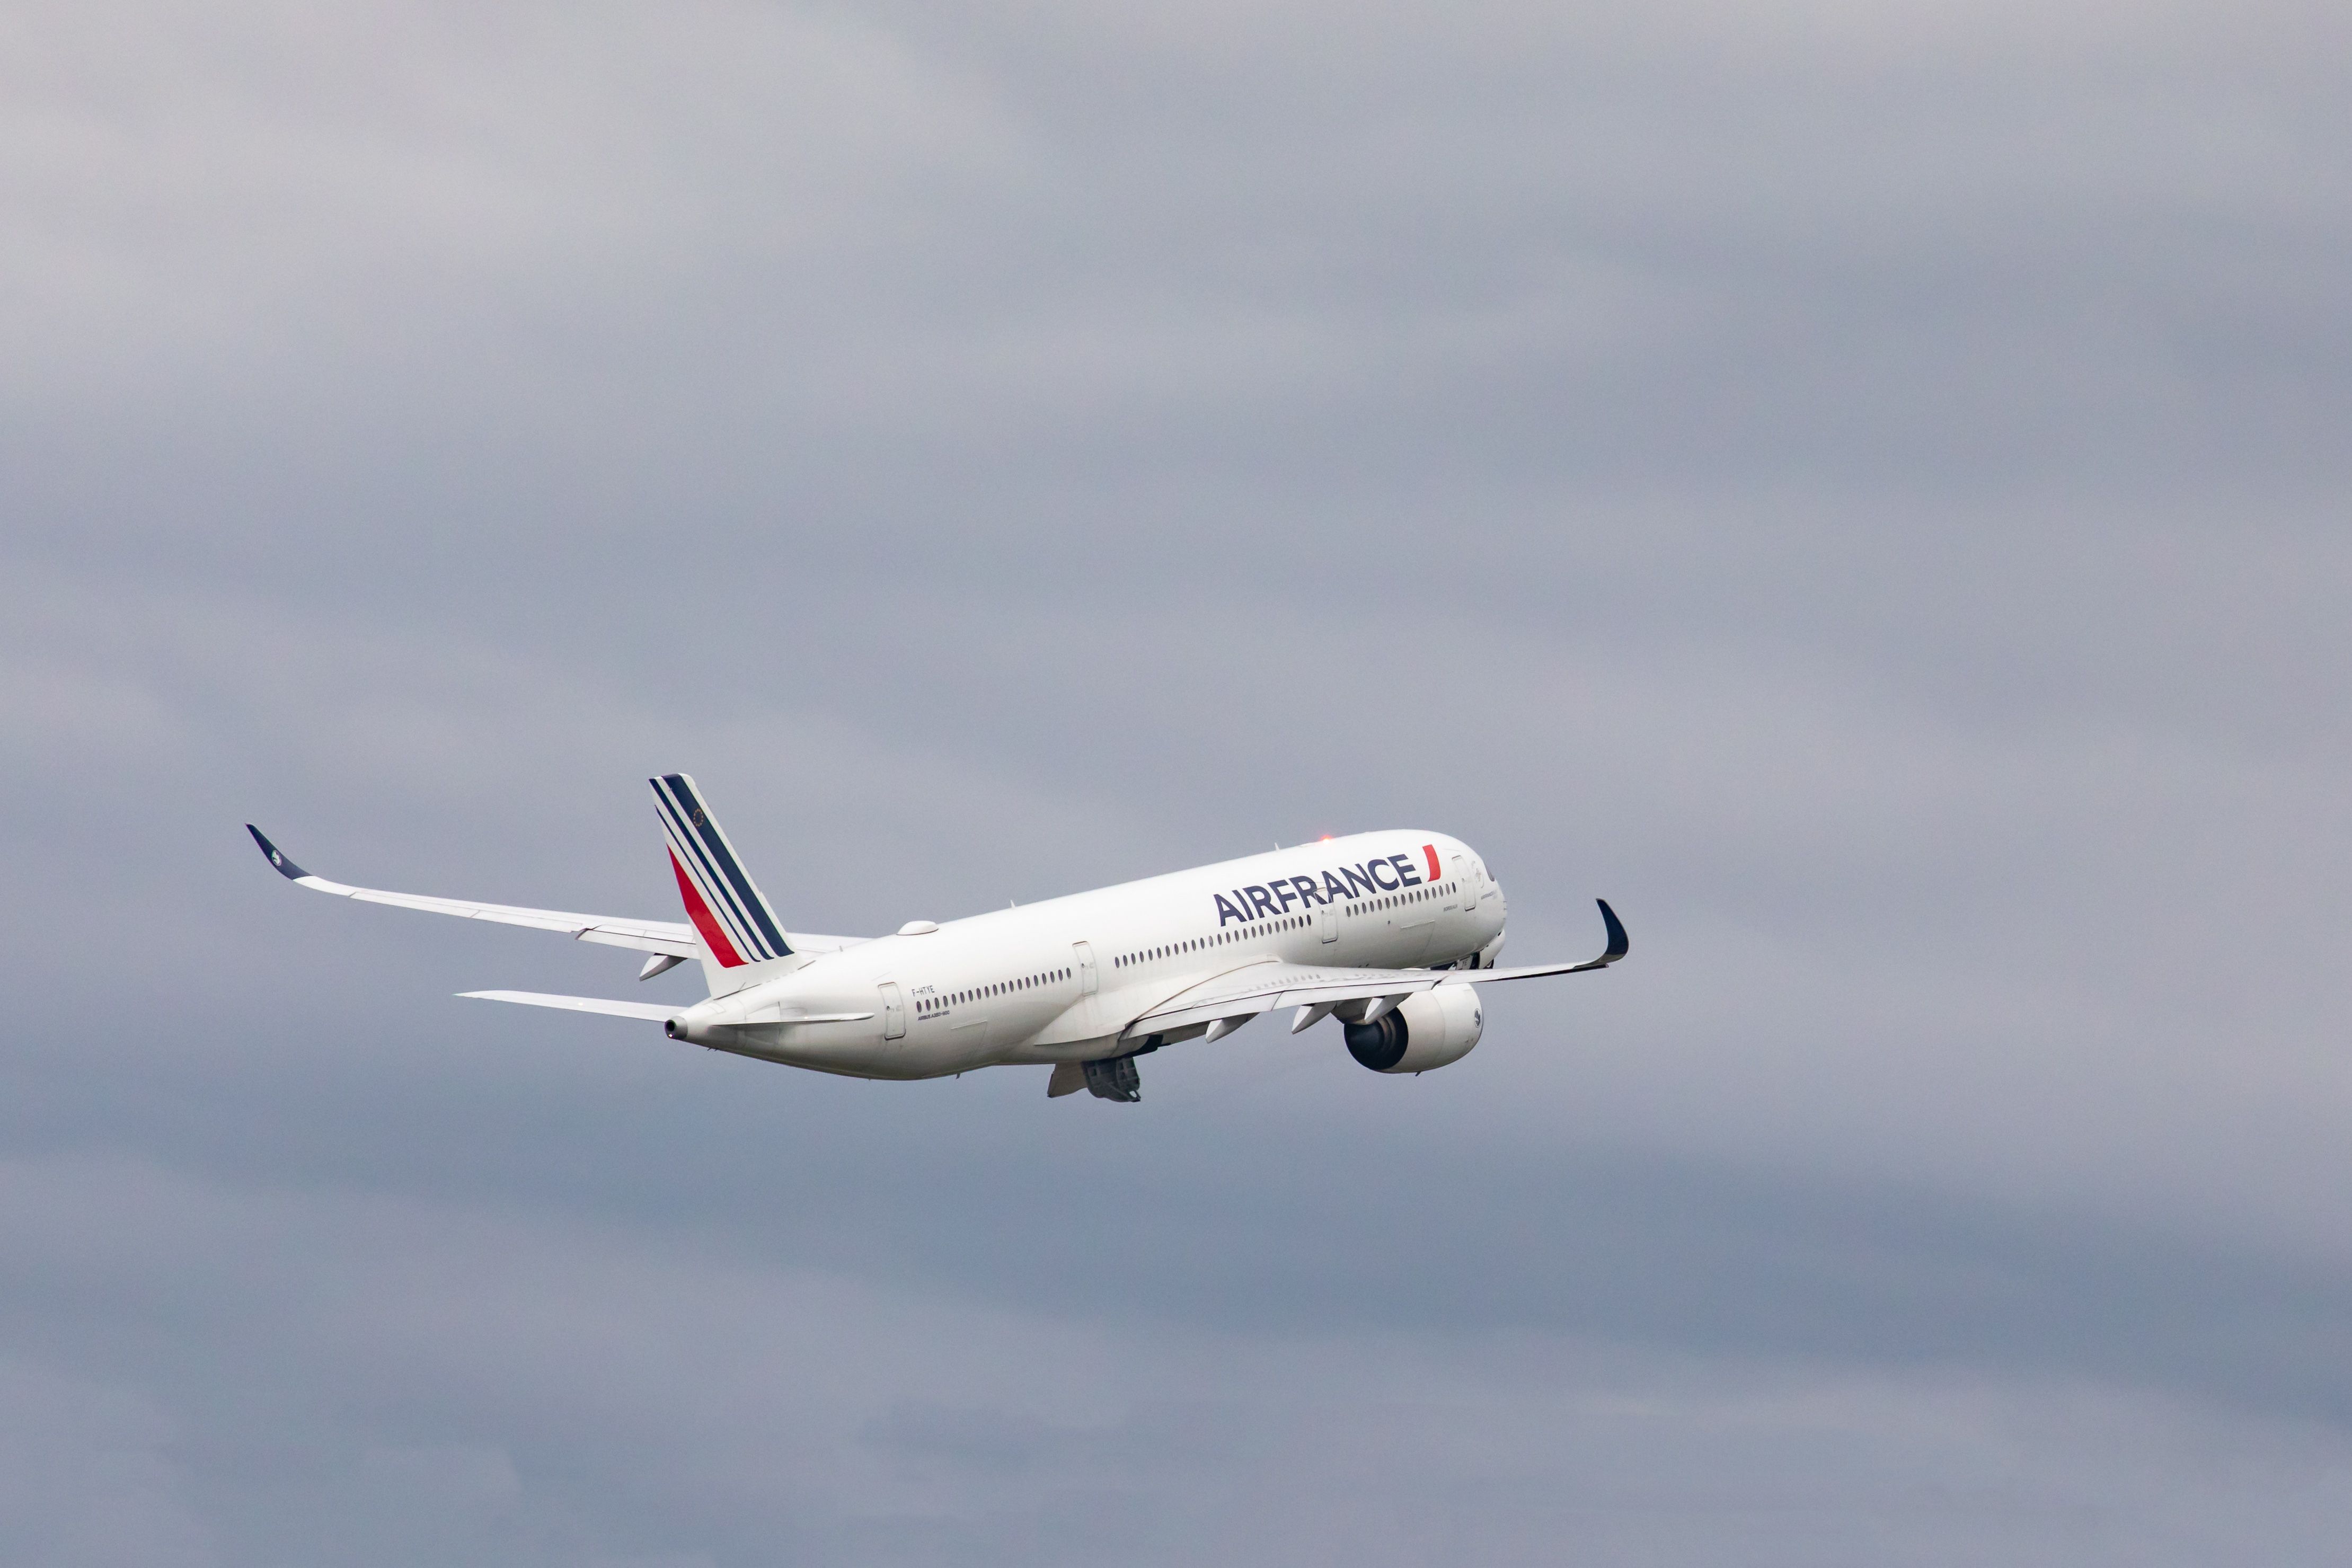 An Air France Airbus A350-900 taking off from Toronto Pearson international Airport.